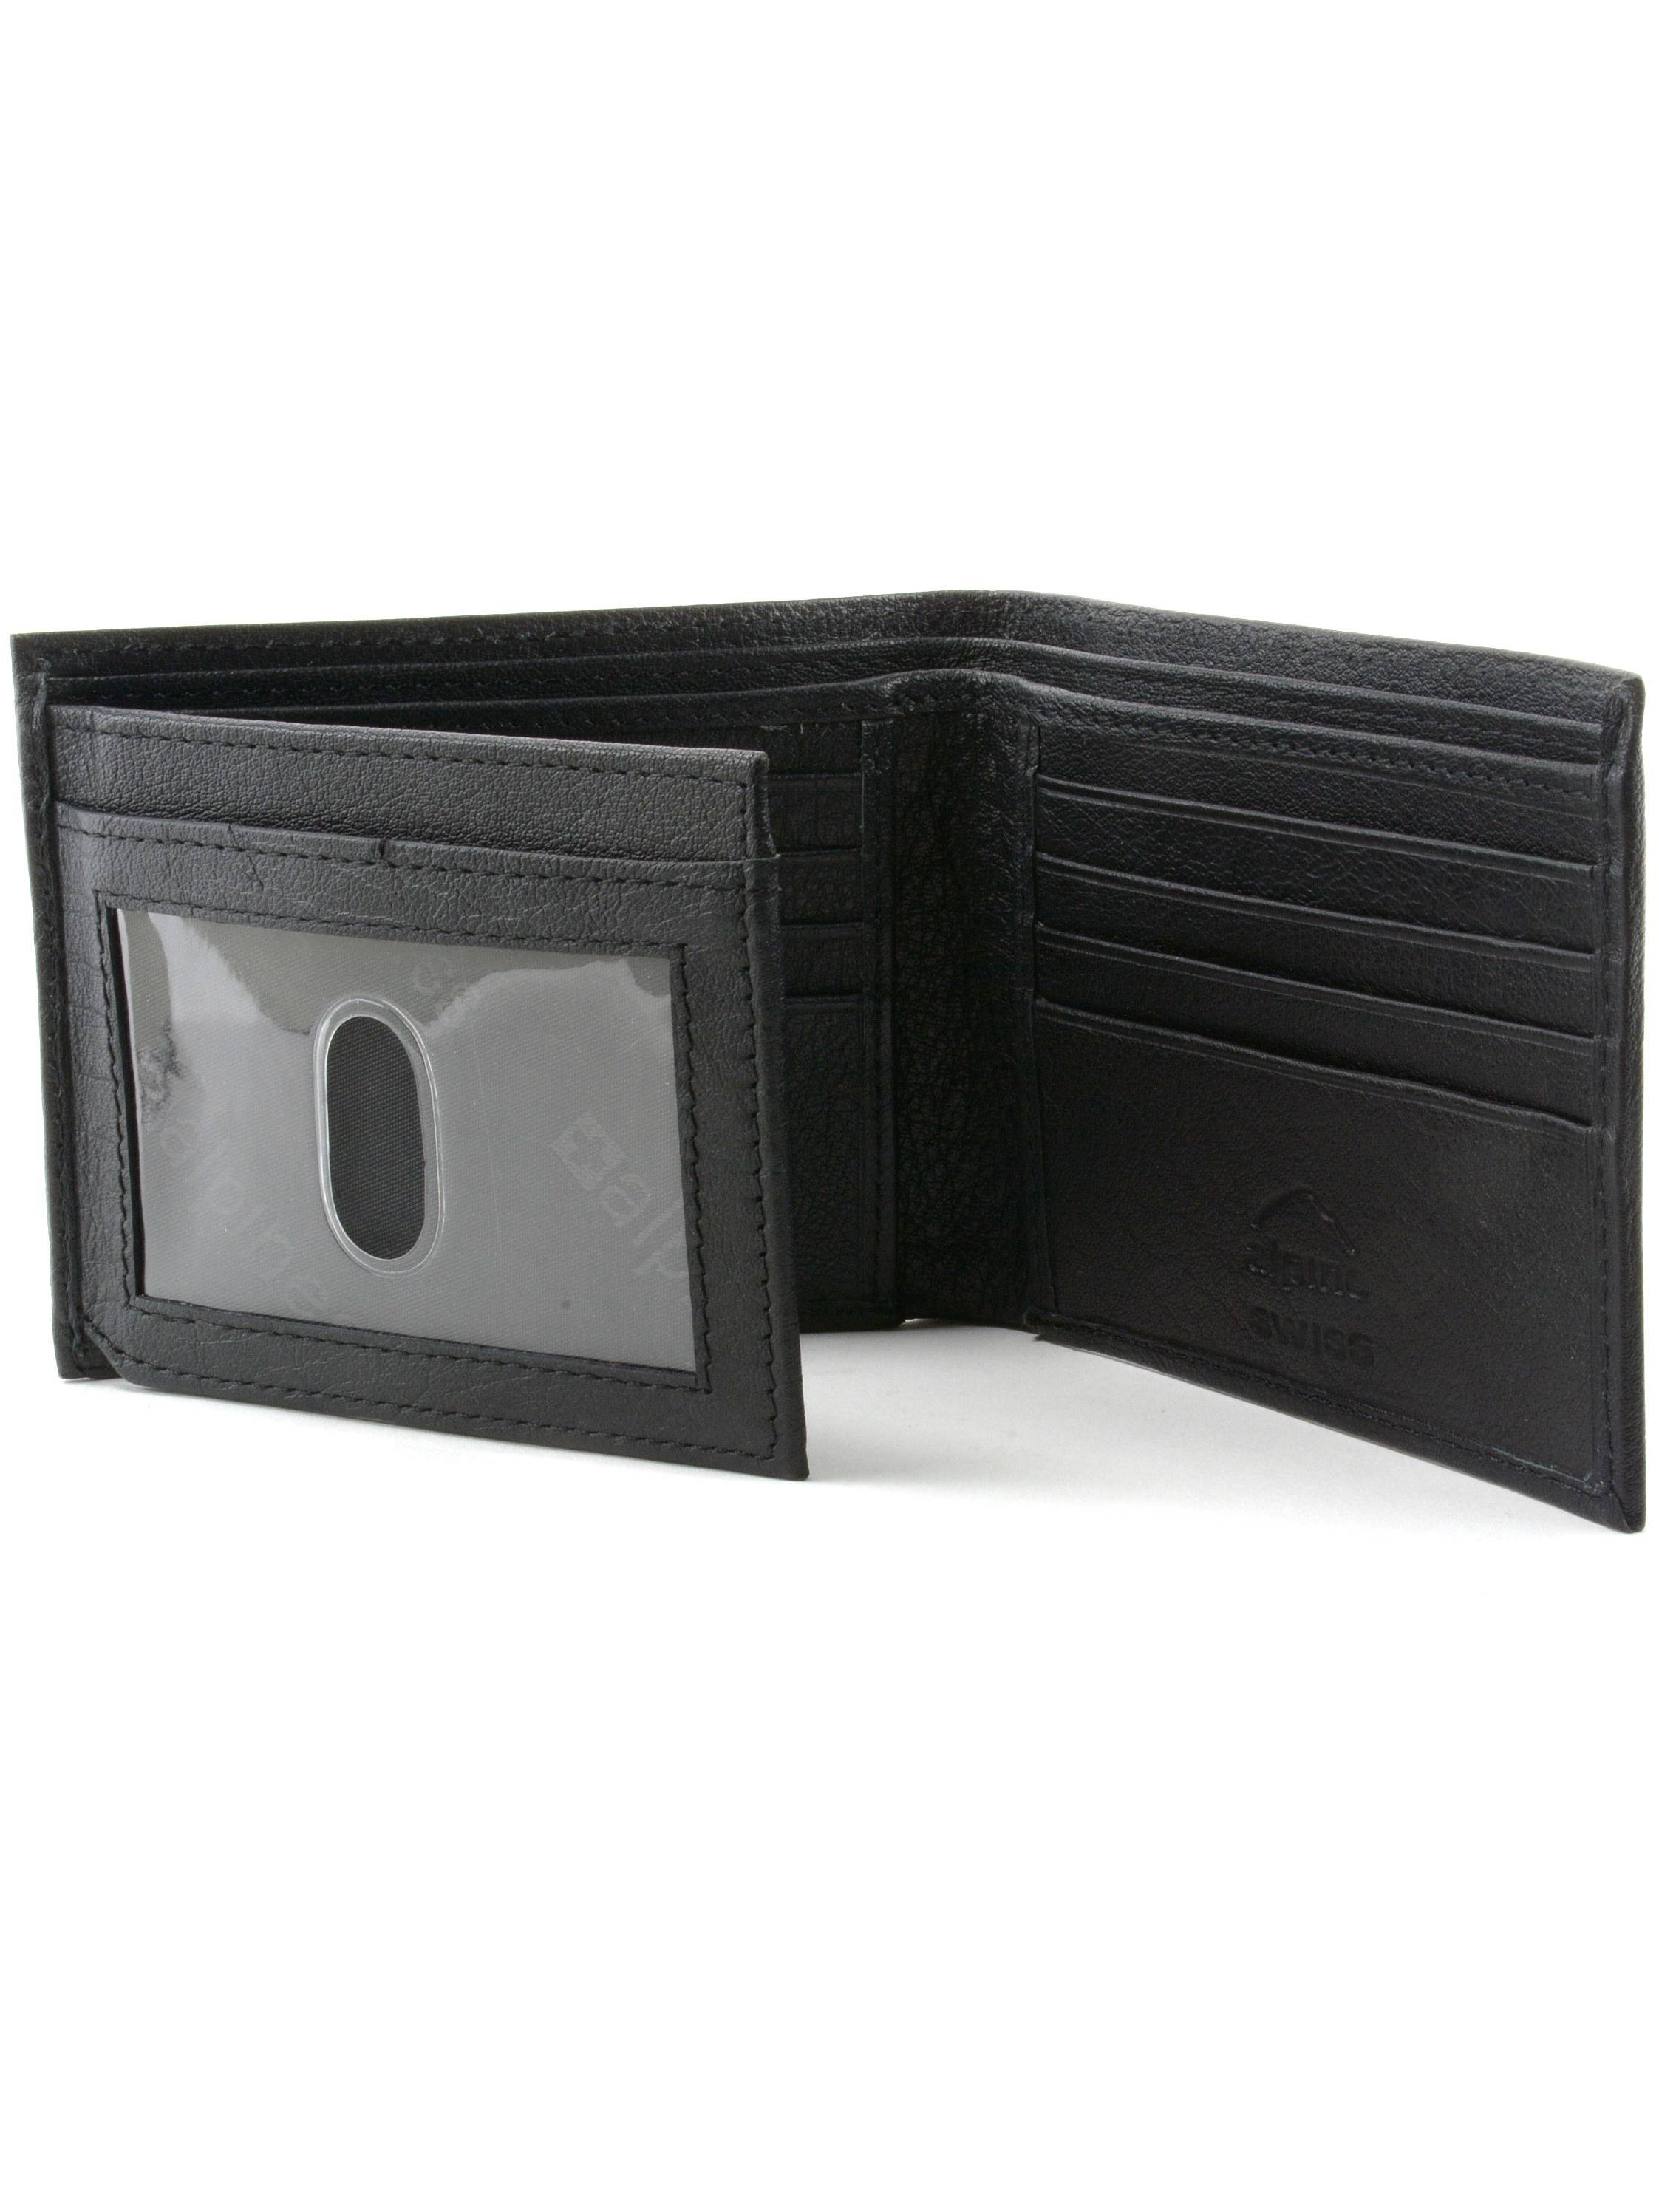 Alpine Swiss Mens Wallet Real Leather Flipout Hybrid Bifold Trifold ID Card Case - image 5 of 7